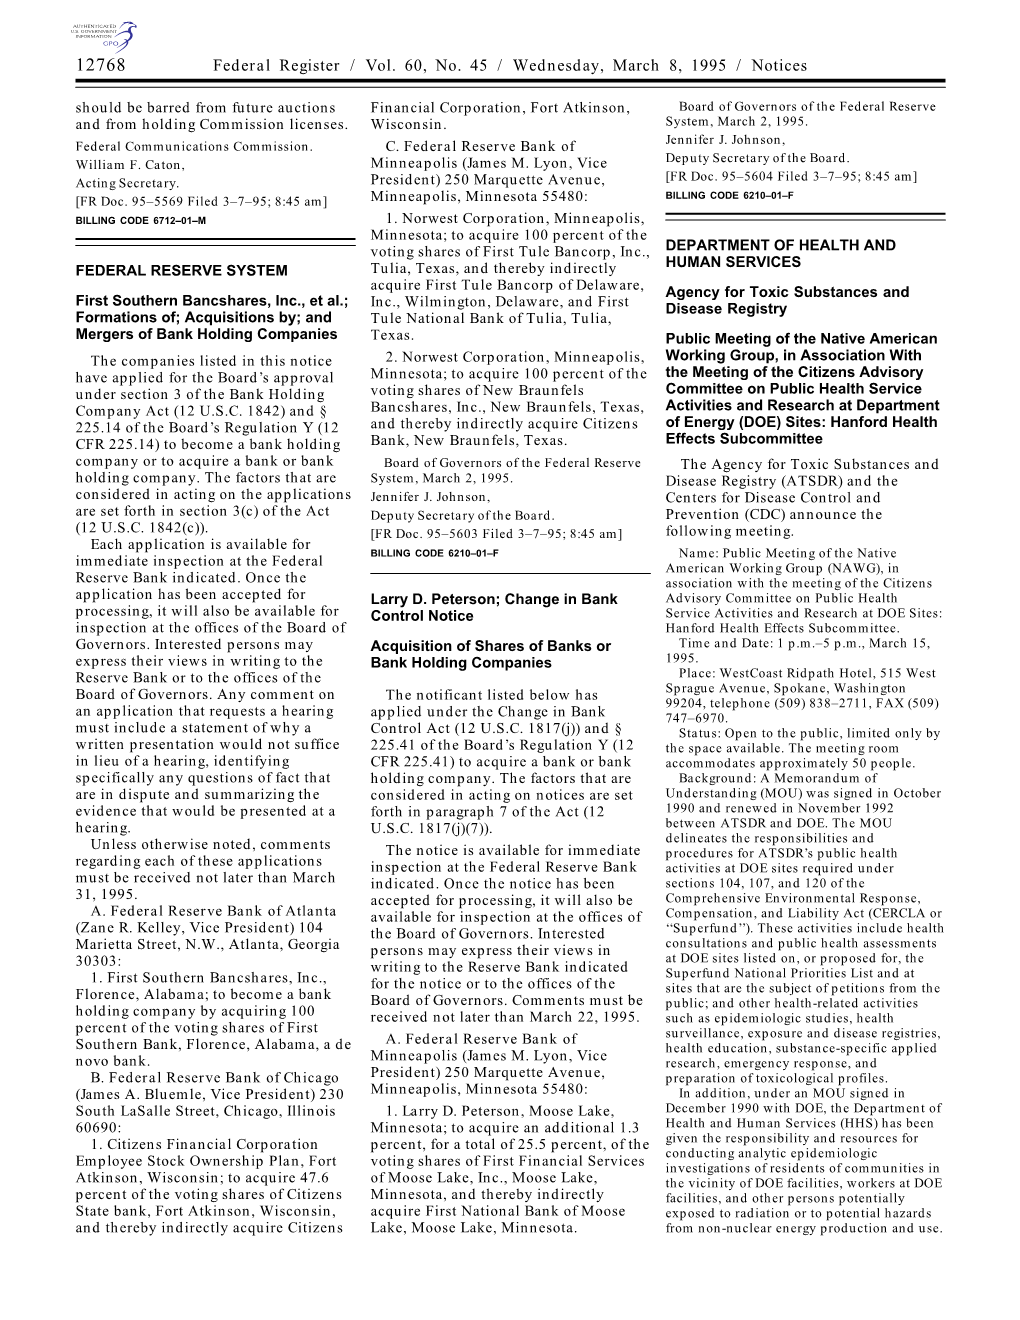 Federal Register / Vol. 60, No. 45 / Wednesday, March 8, 1995 / Notices